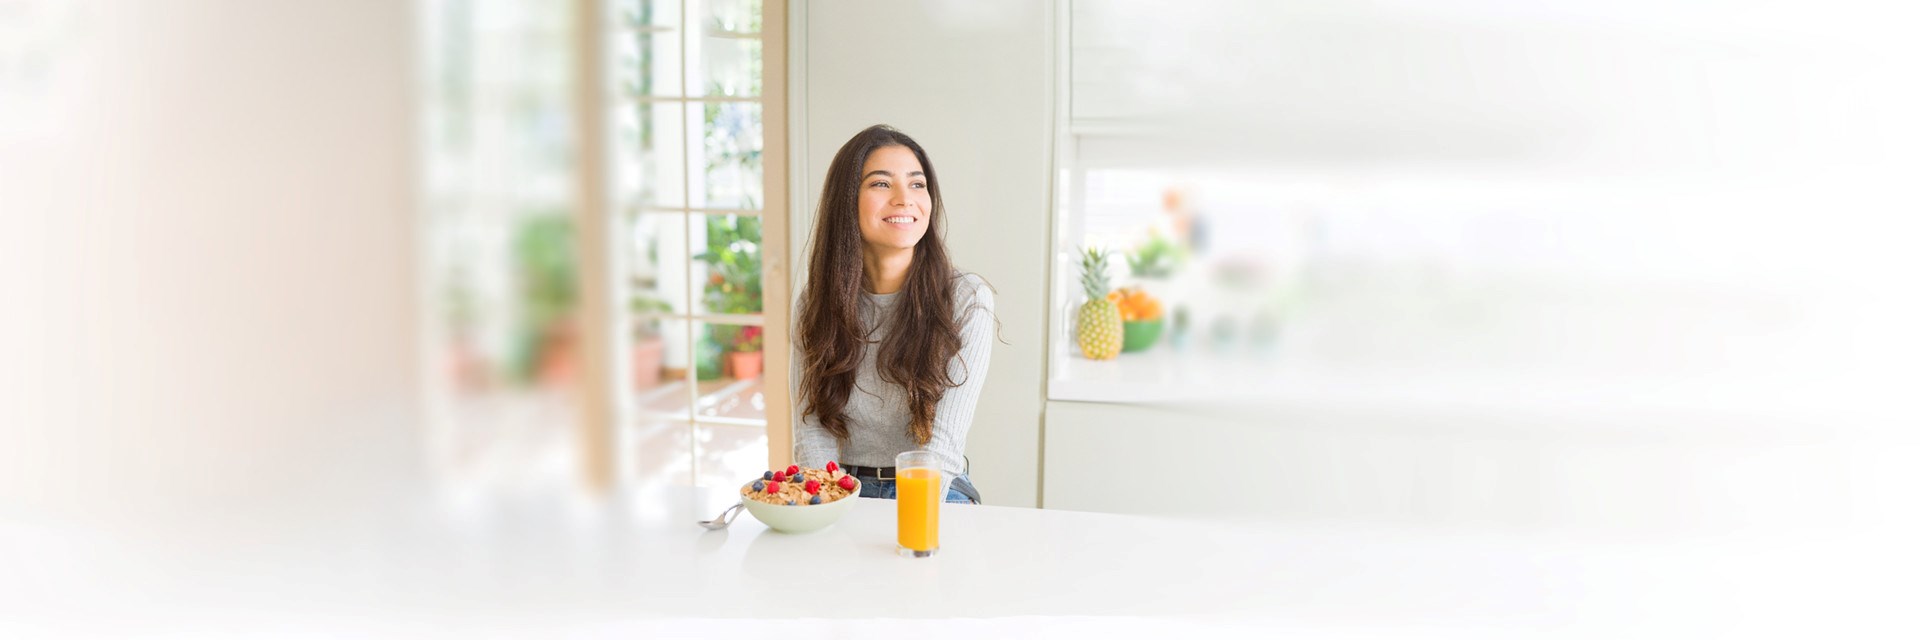 Young woman sat at kitchen counter with bowl of fruit and glass of orange juice